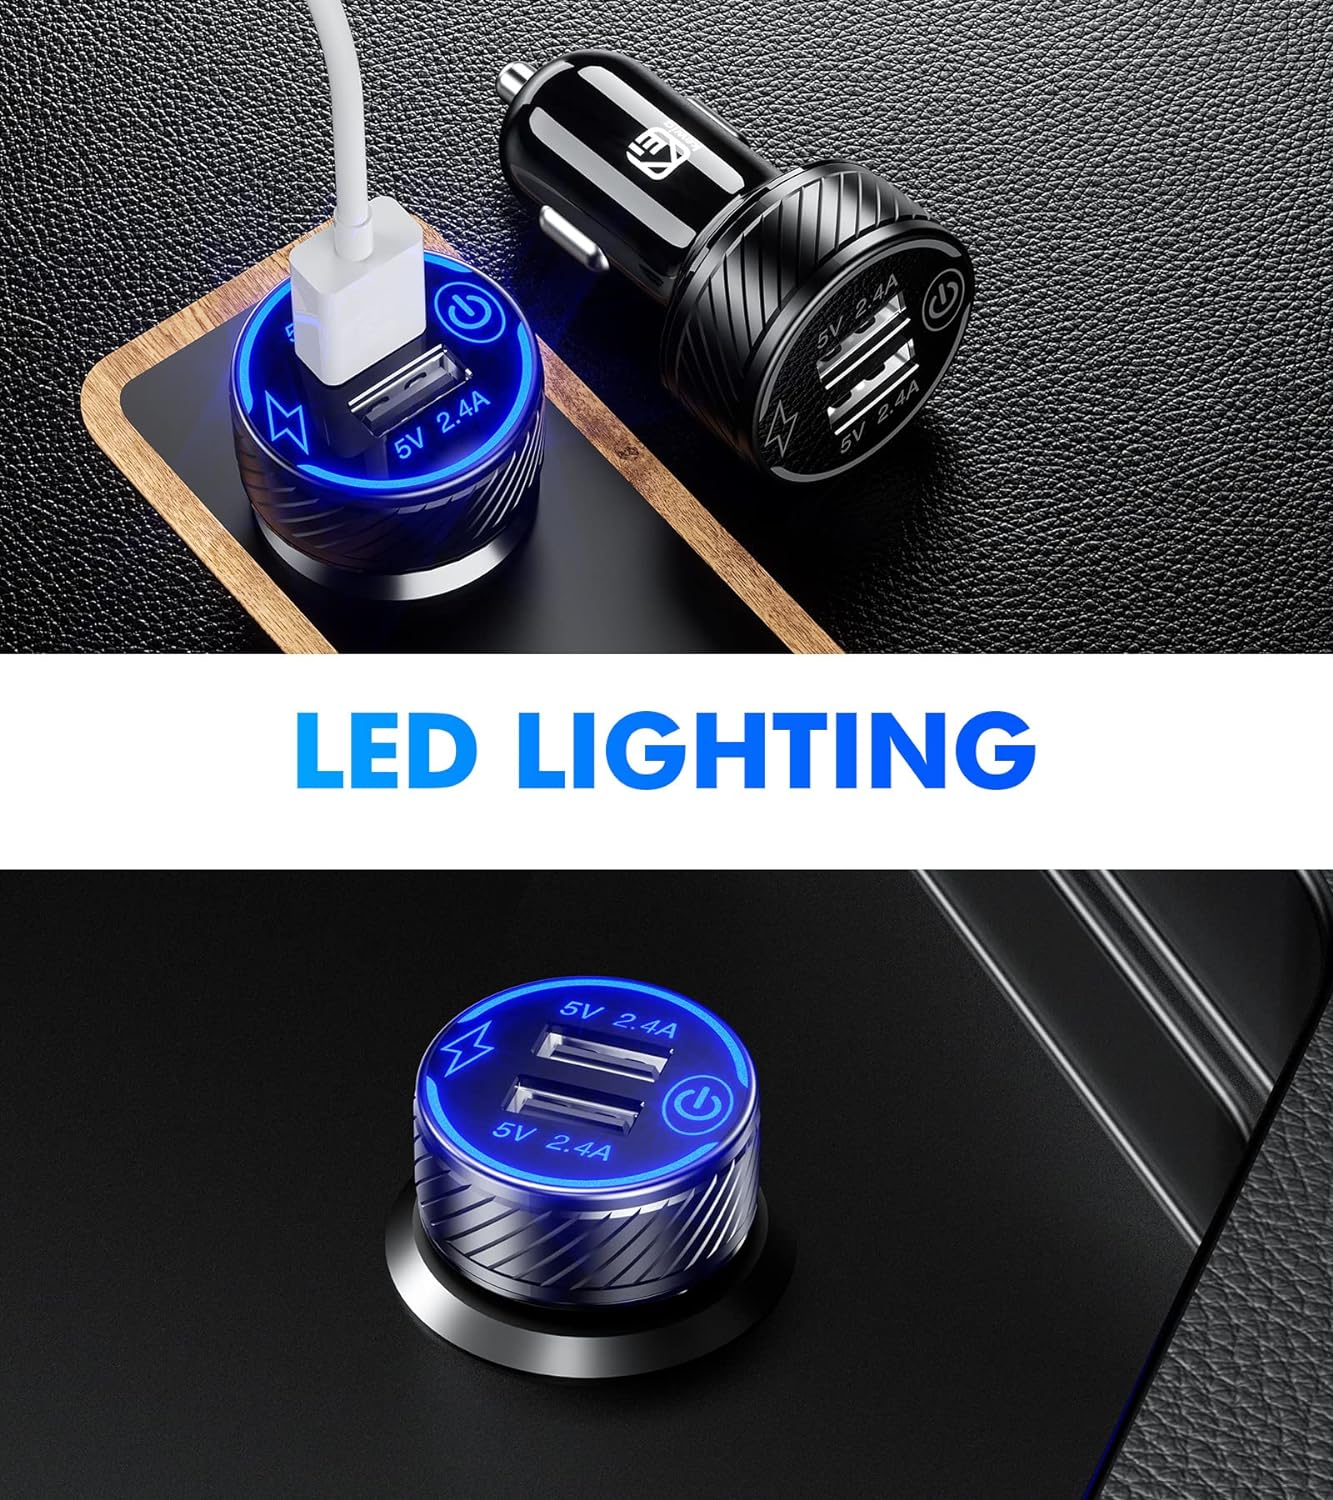 【2Pack】 USB Car Charger, Dual USB Port Car Charger Adapter, 5V/4.8A Charge Car Phone Charger with Blue LED & Touch Switch Fit for iPhone 13/12 Pro/Max/8, Galaxy S21/20/10/9 (Black)